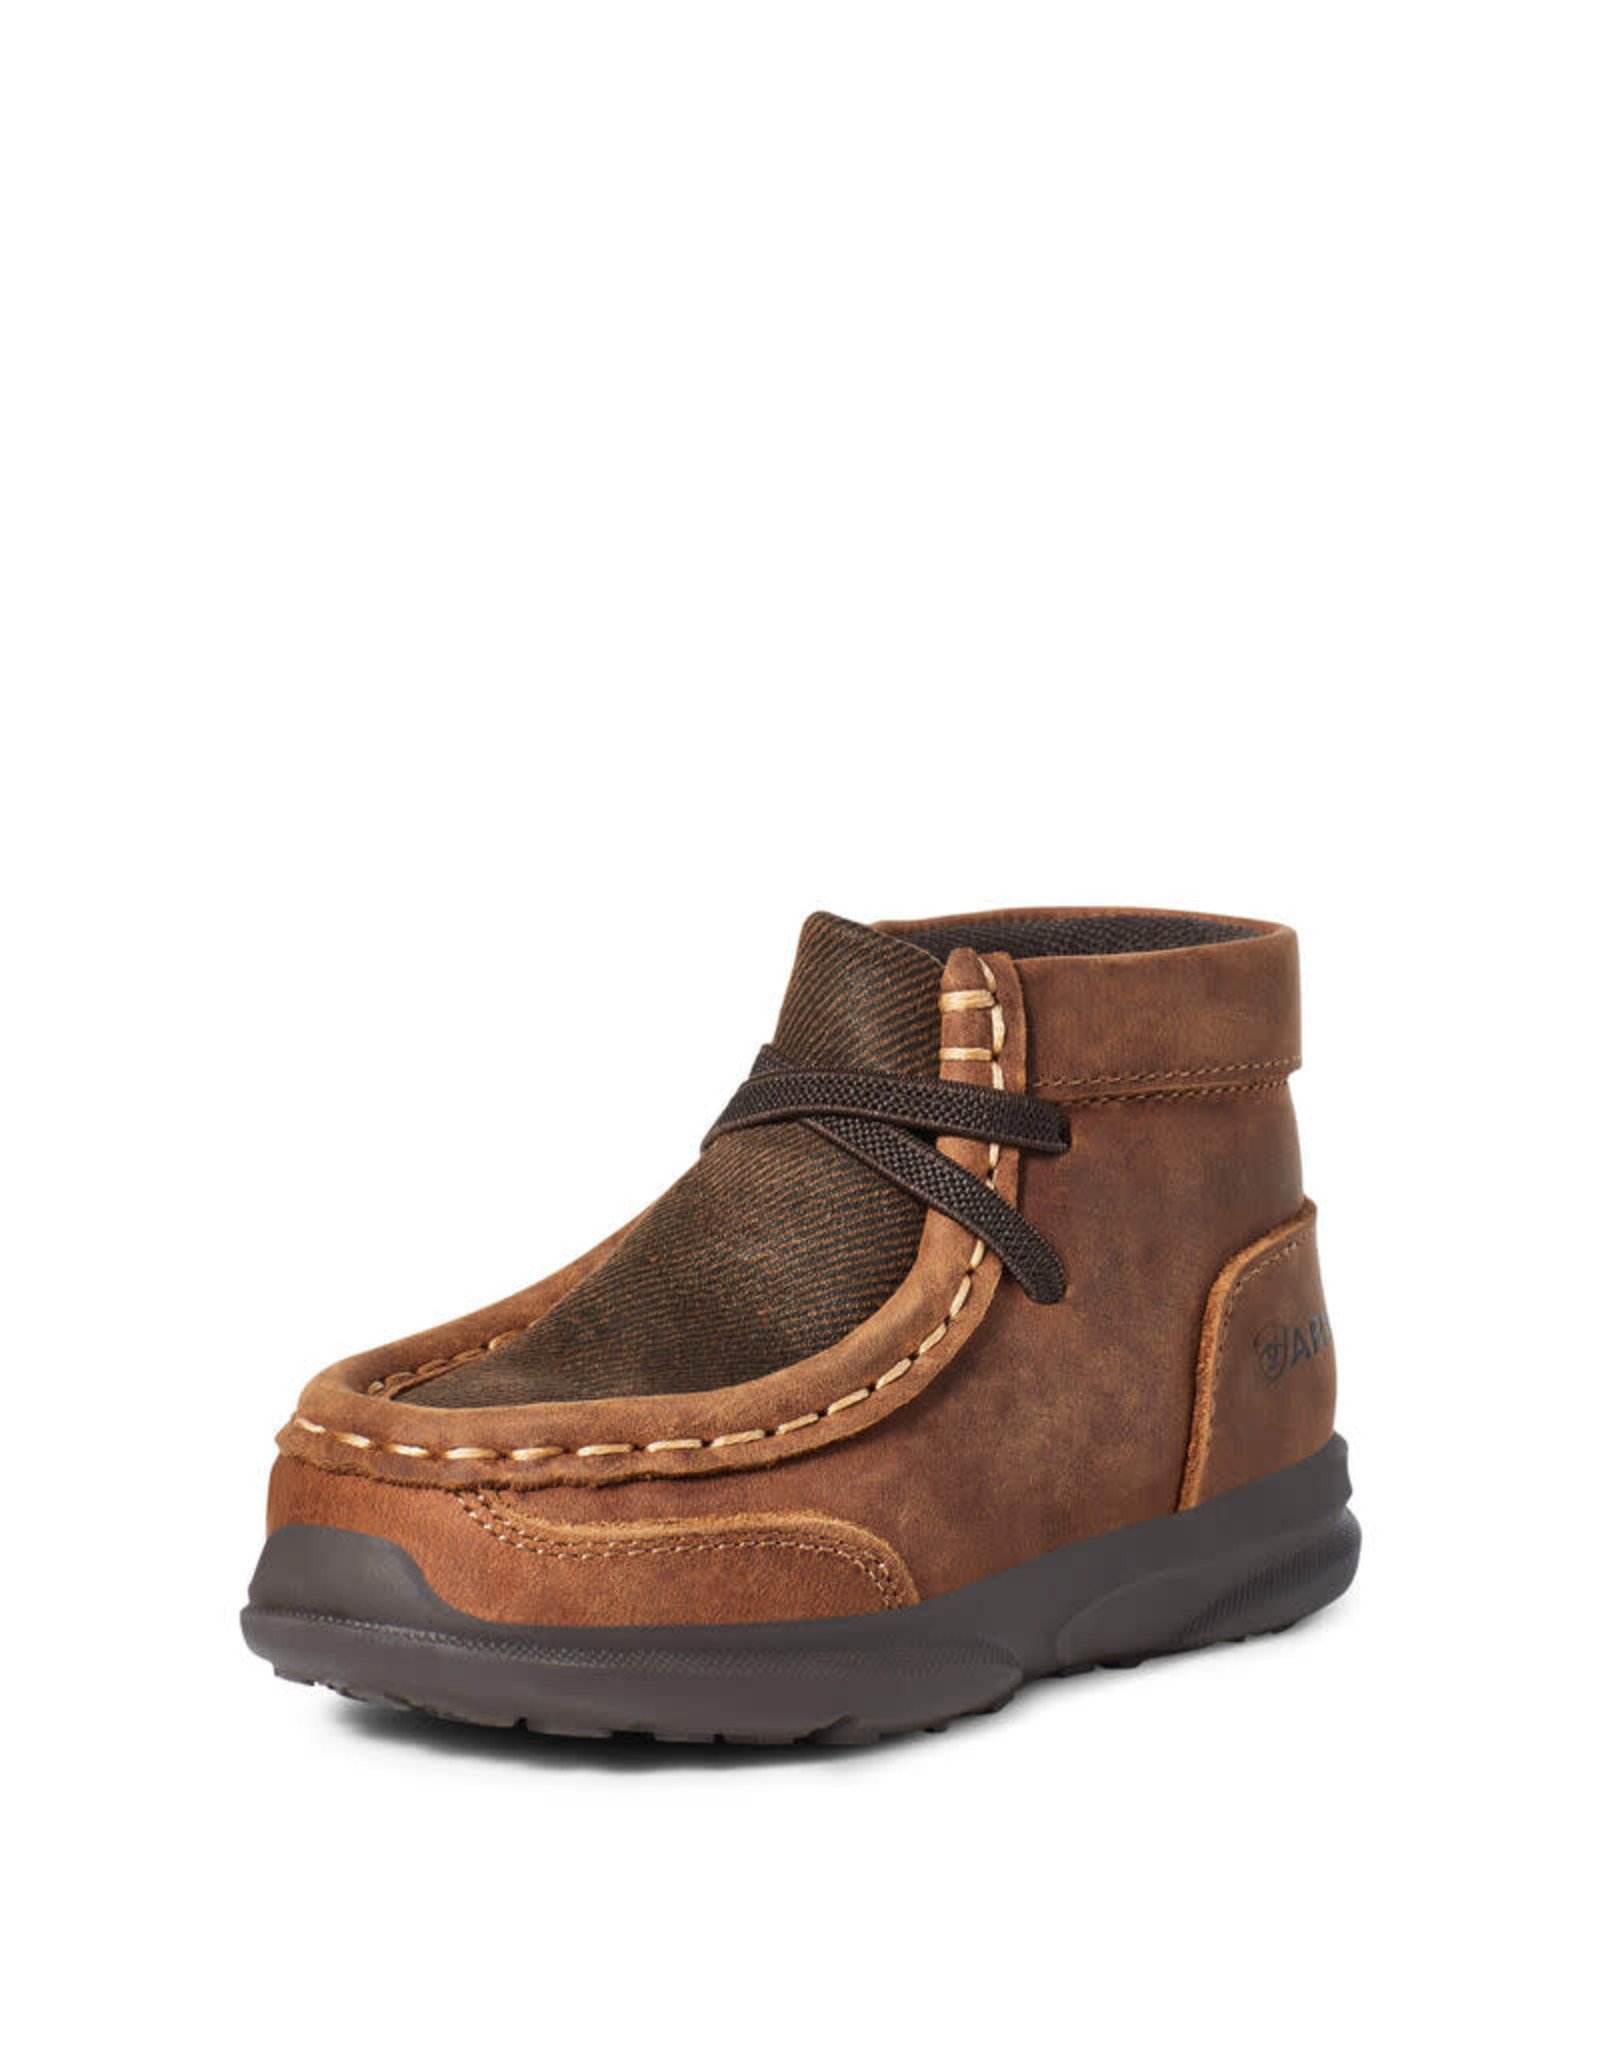 Boys Lil Stompers Brown Bootie